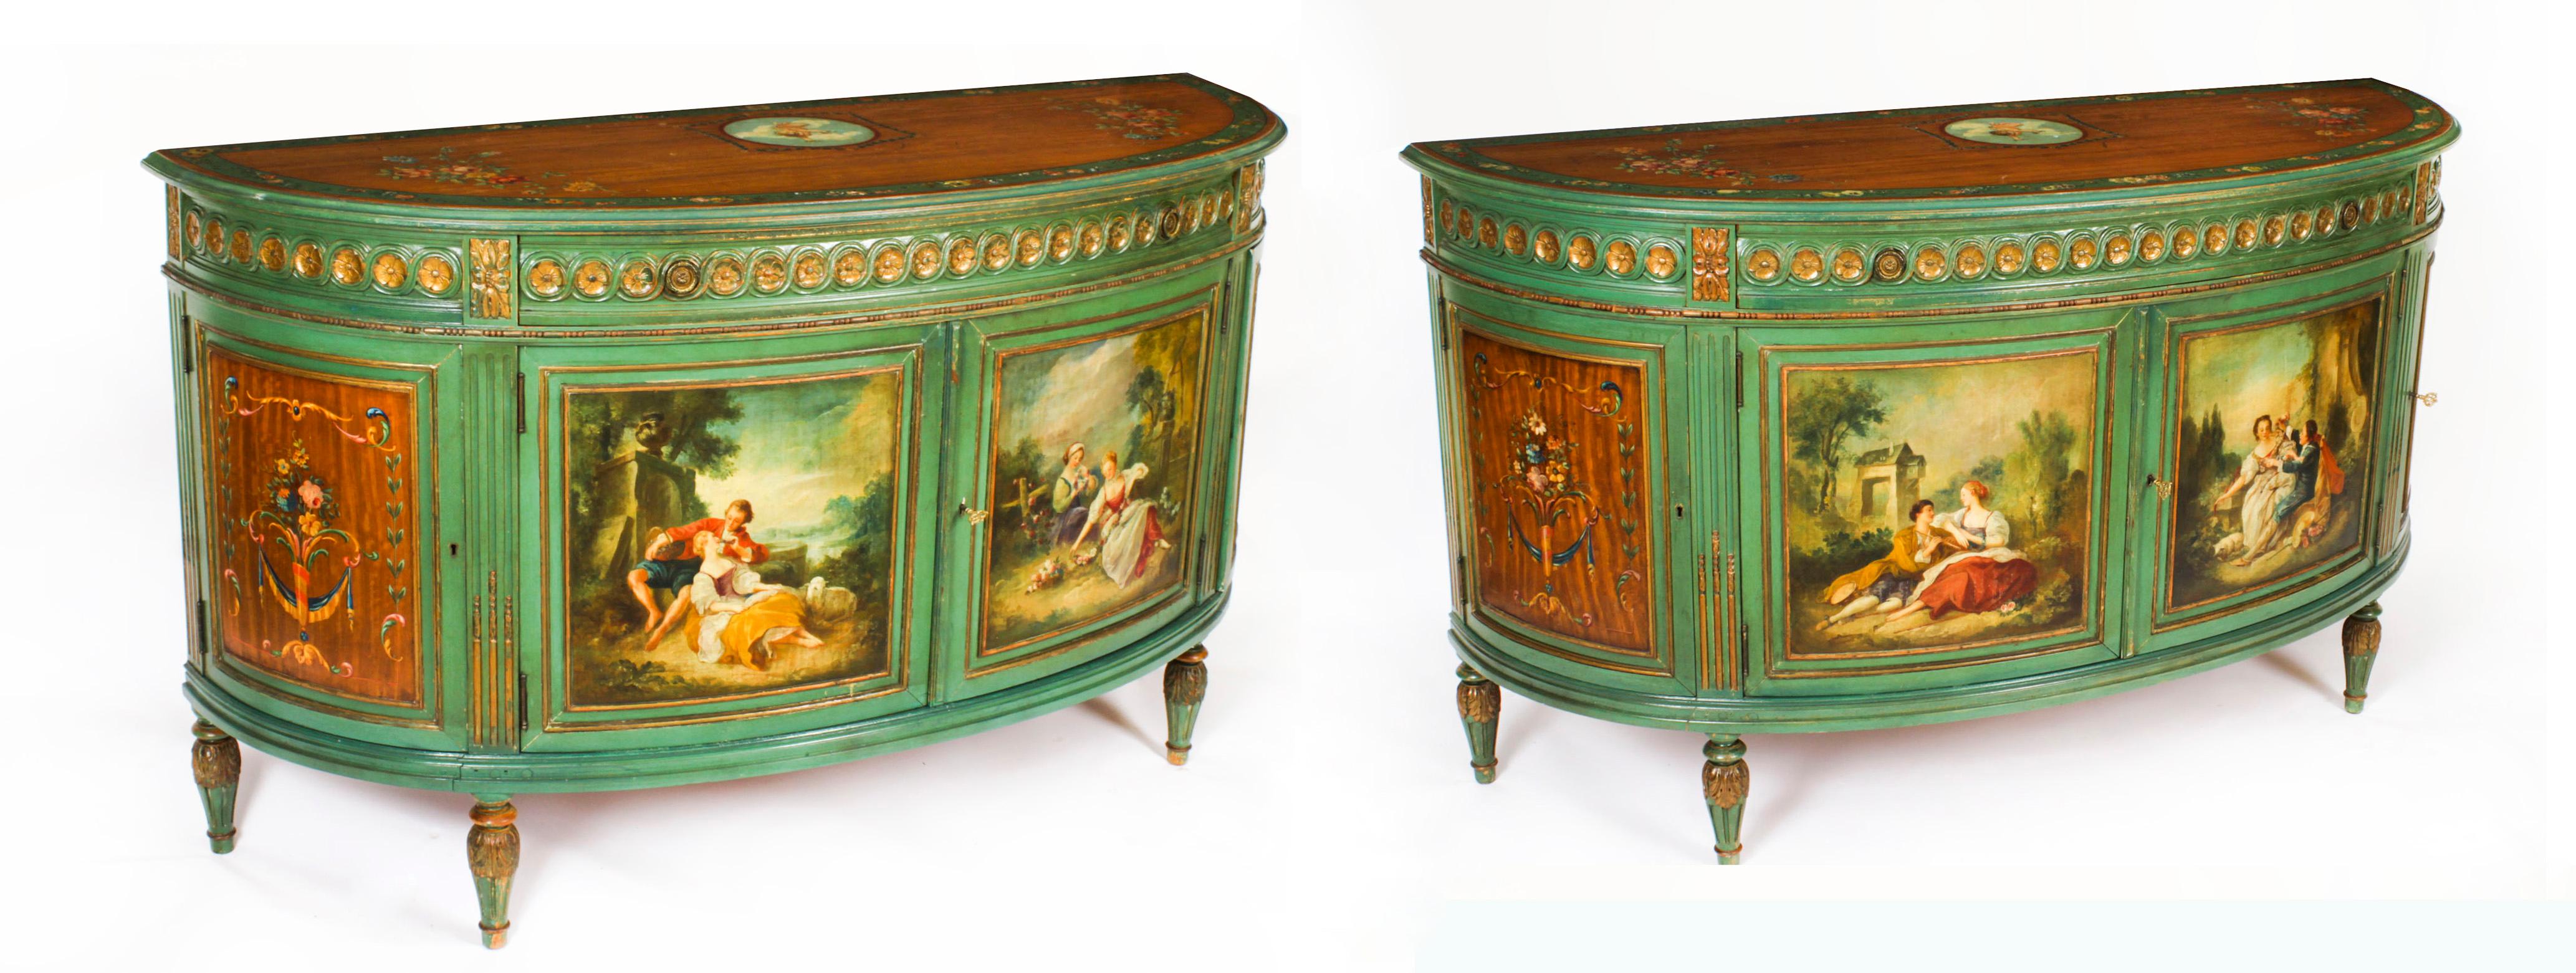 This is a gorgeous antique pair of antique French Louis XVI revival demi lune commodes with beautiful hand painted decoration in the manner of Francois Boucher,  Circa 1920 in date.
 
The half moon satin wood top of each commode features